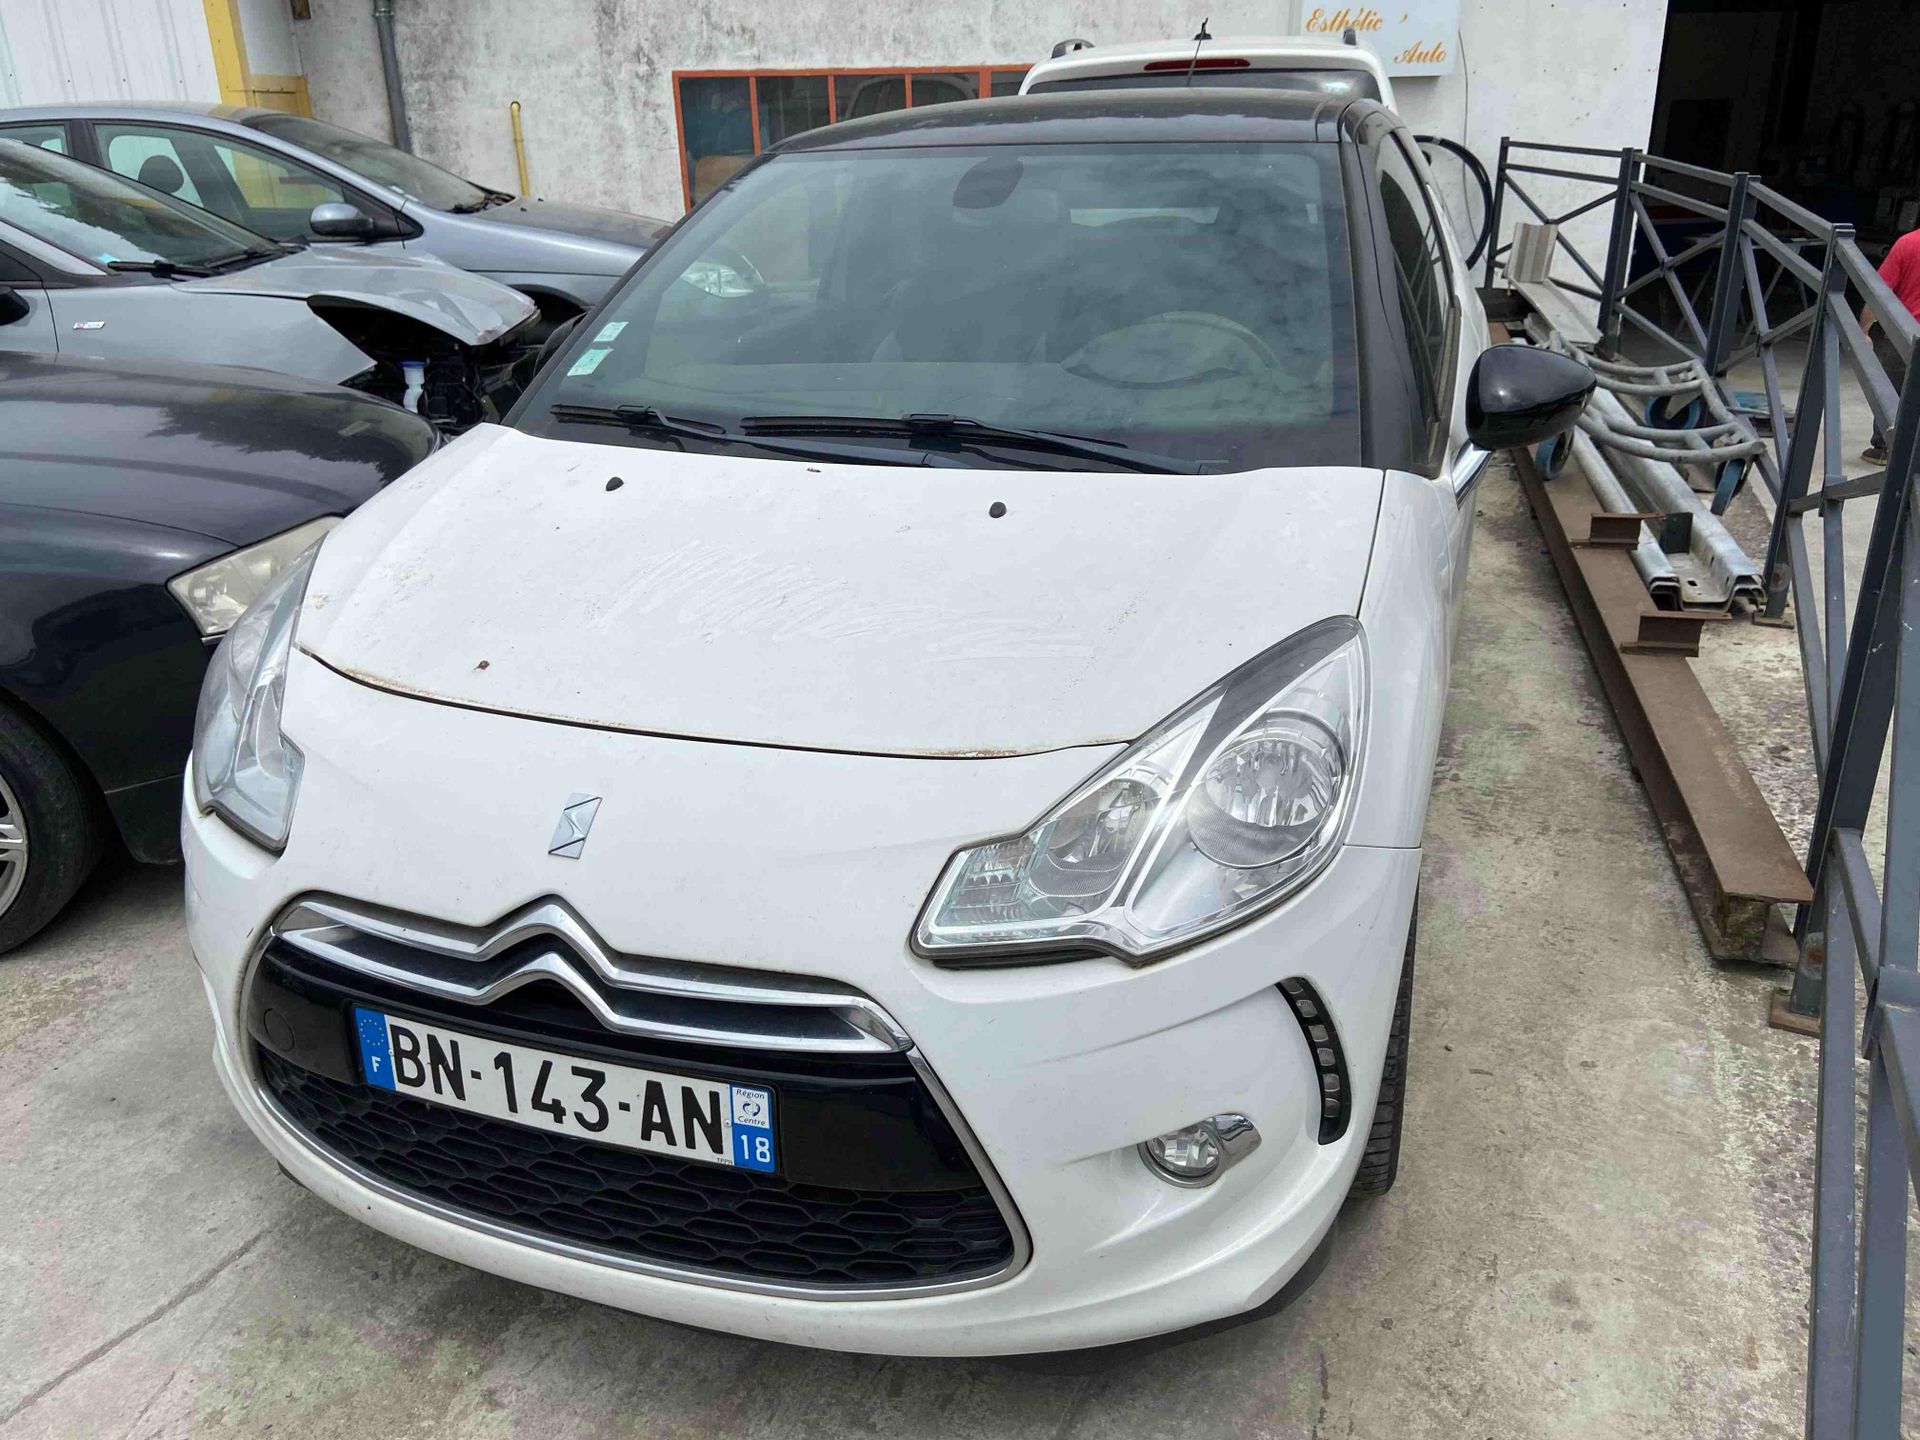 Null [RP][ACI] Reserved for automotive professionals.
CITROEN DS3 1.4 Vti 95, Pe&hellip;